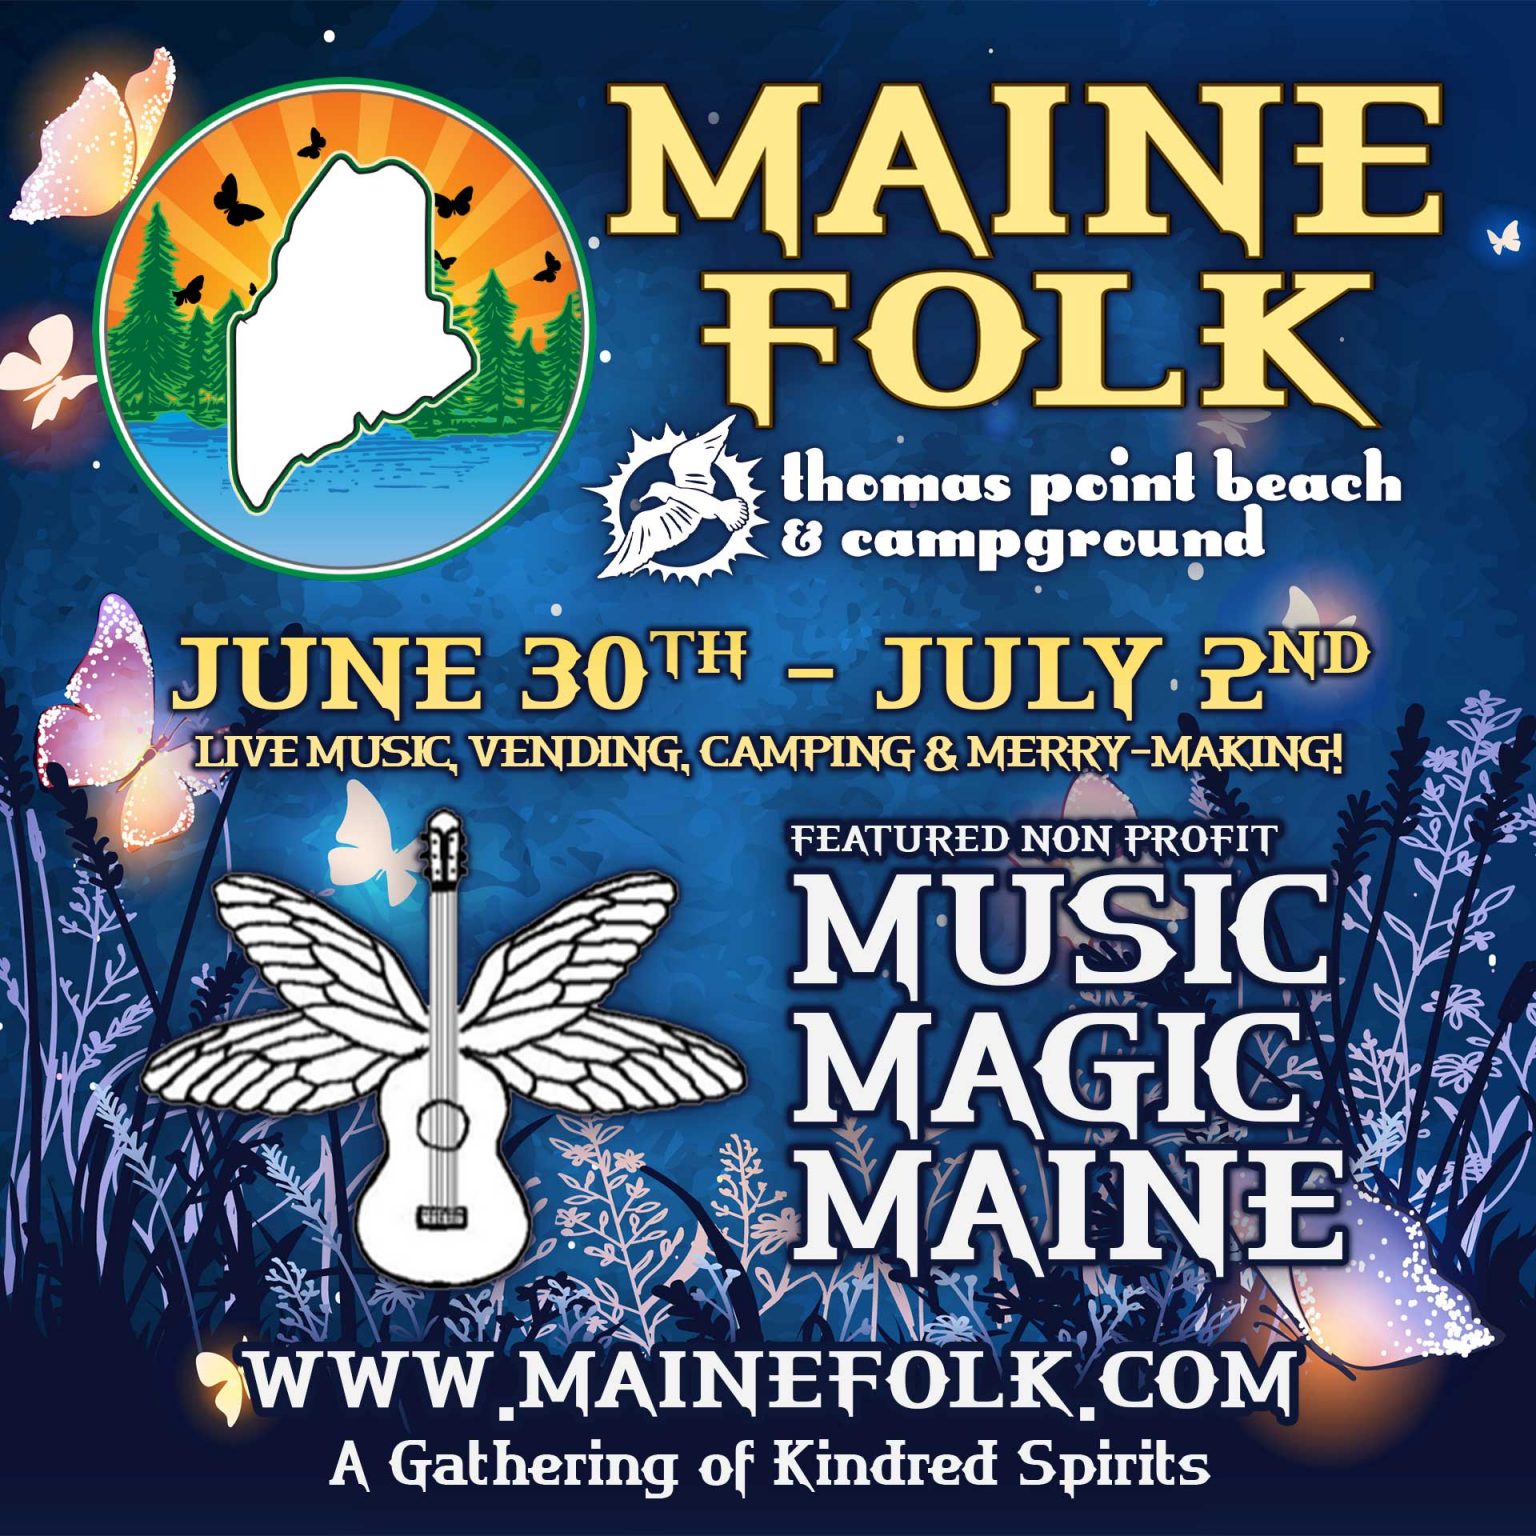 Maine Folk June 30th - July 2nd, A Gathering of Kindred Spirits 2